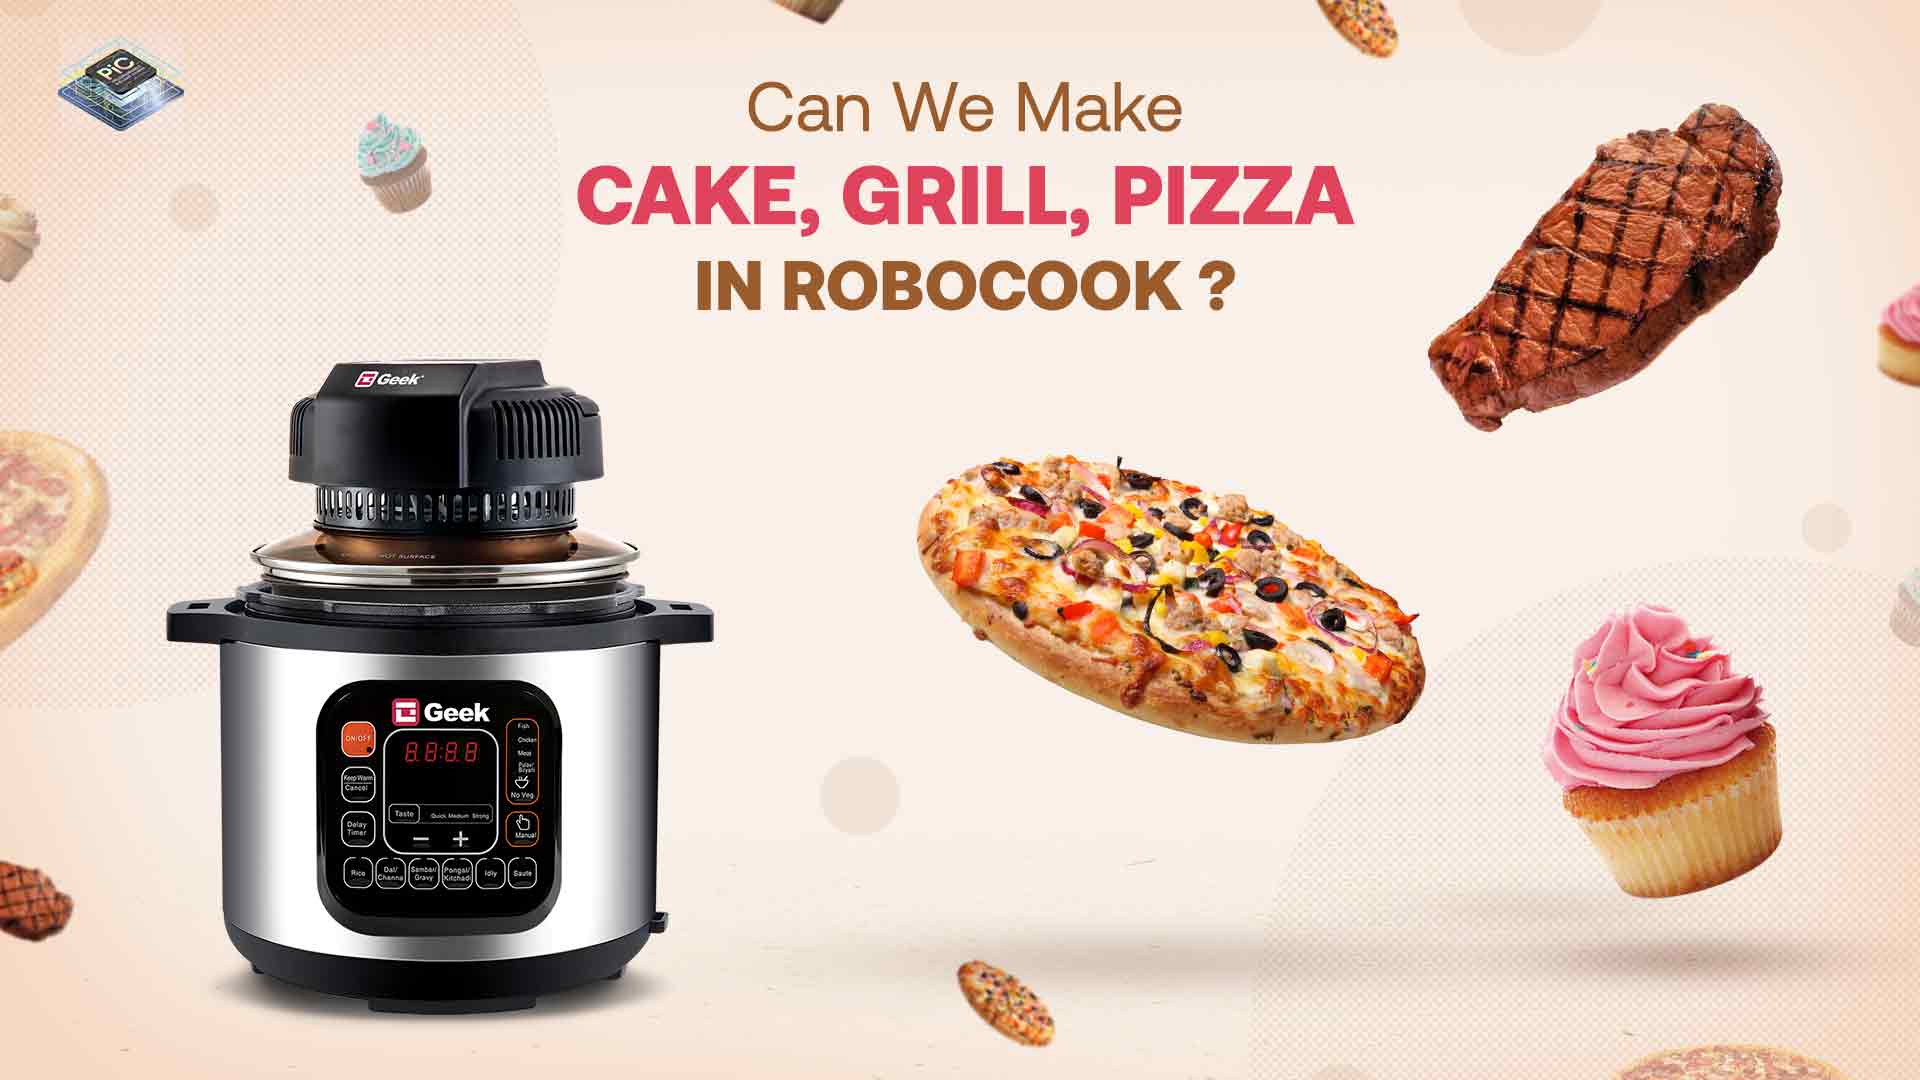 Cake, Grill, Pizza